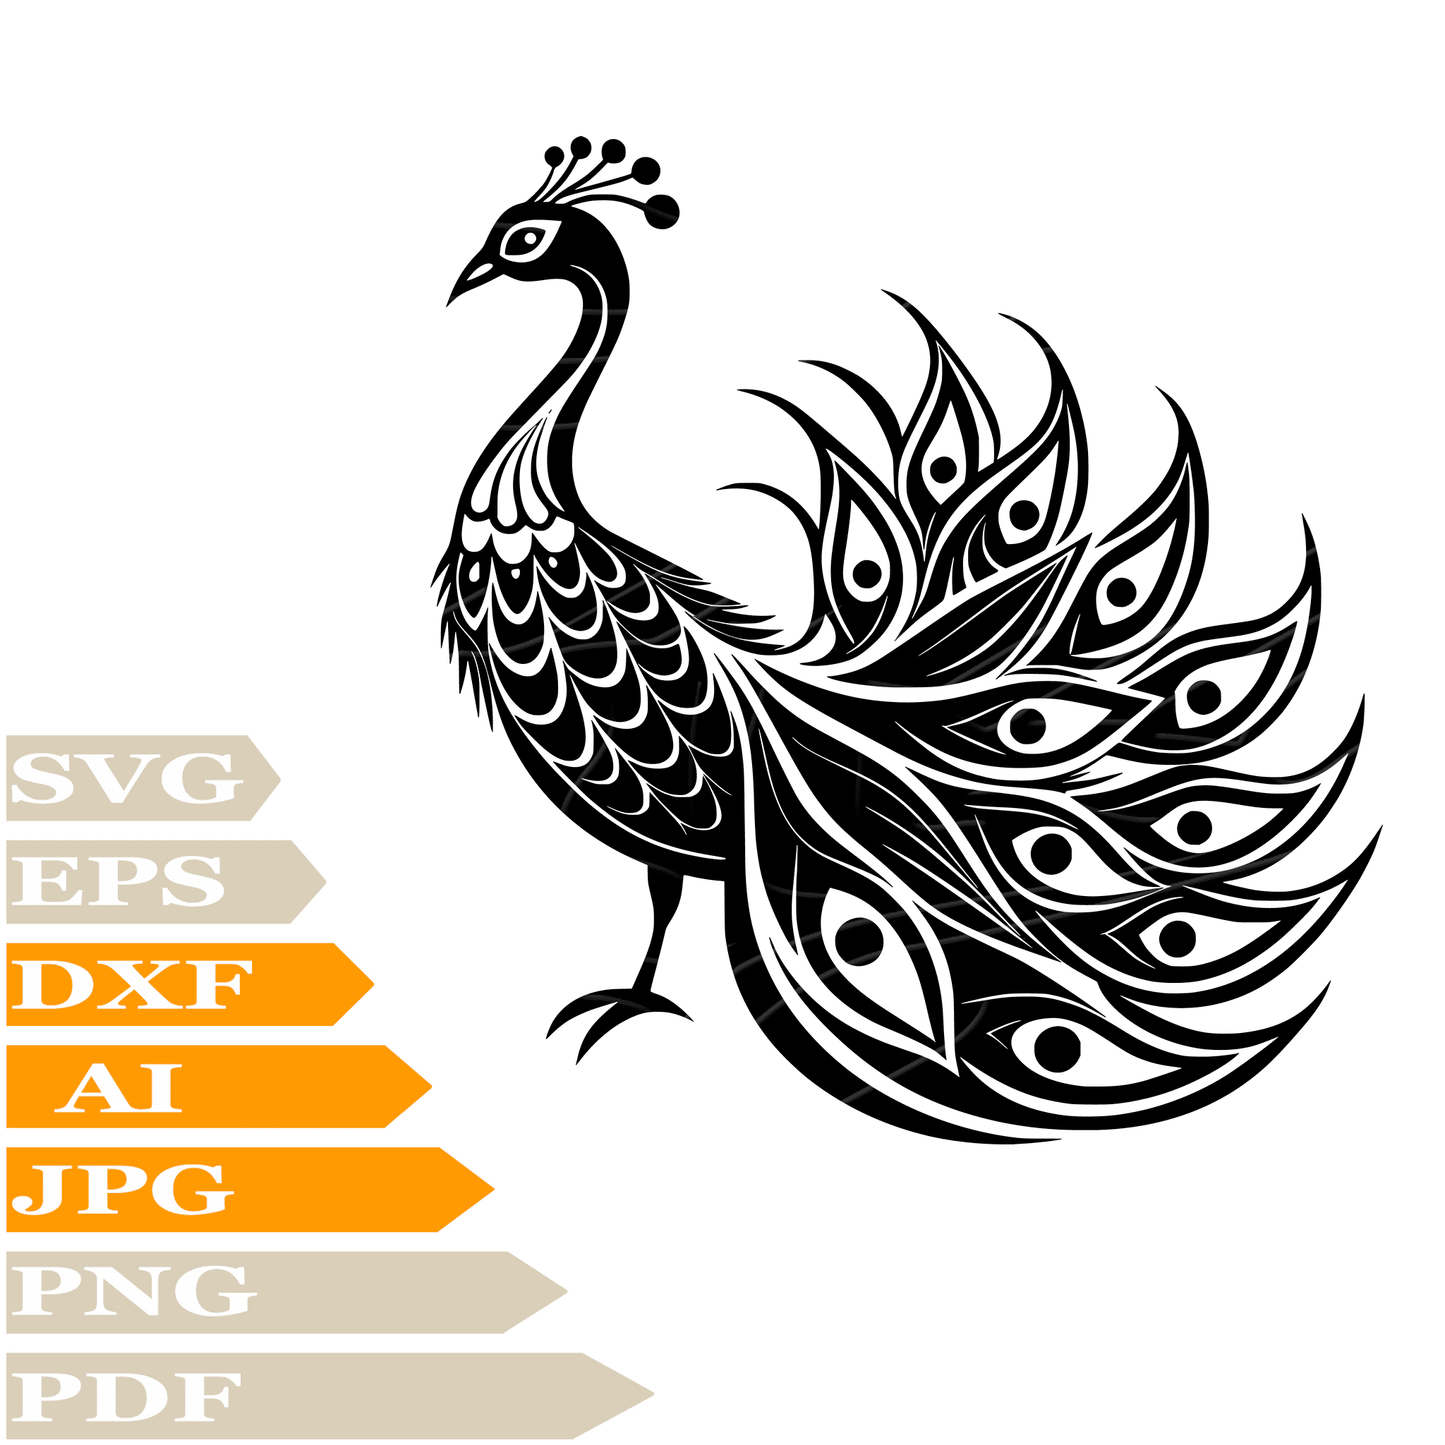 Peacock SVG, Feather SVG Design, Bird Peacock Vector, Peacock PNG, Peacock For Cricut, Peacock Cut File, Peacock For Tattoo Image Cut, Clipart, Print, Decal, Shirt